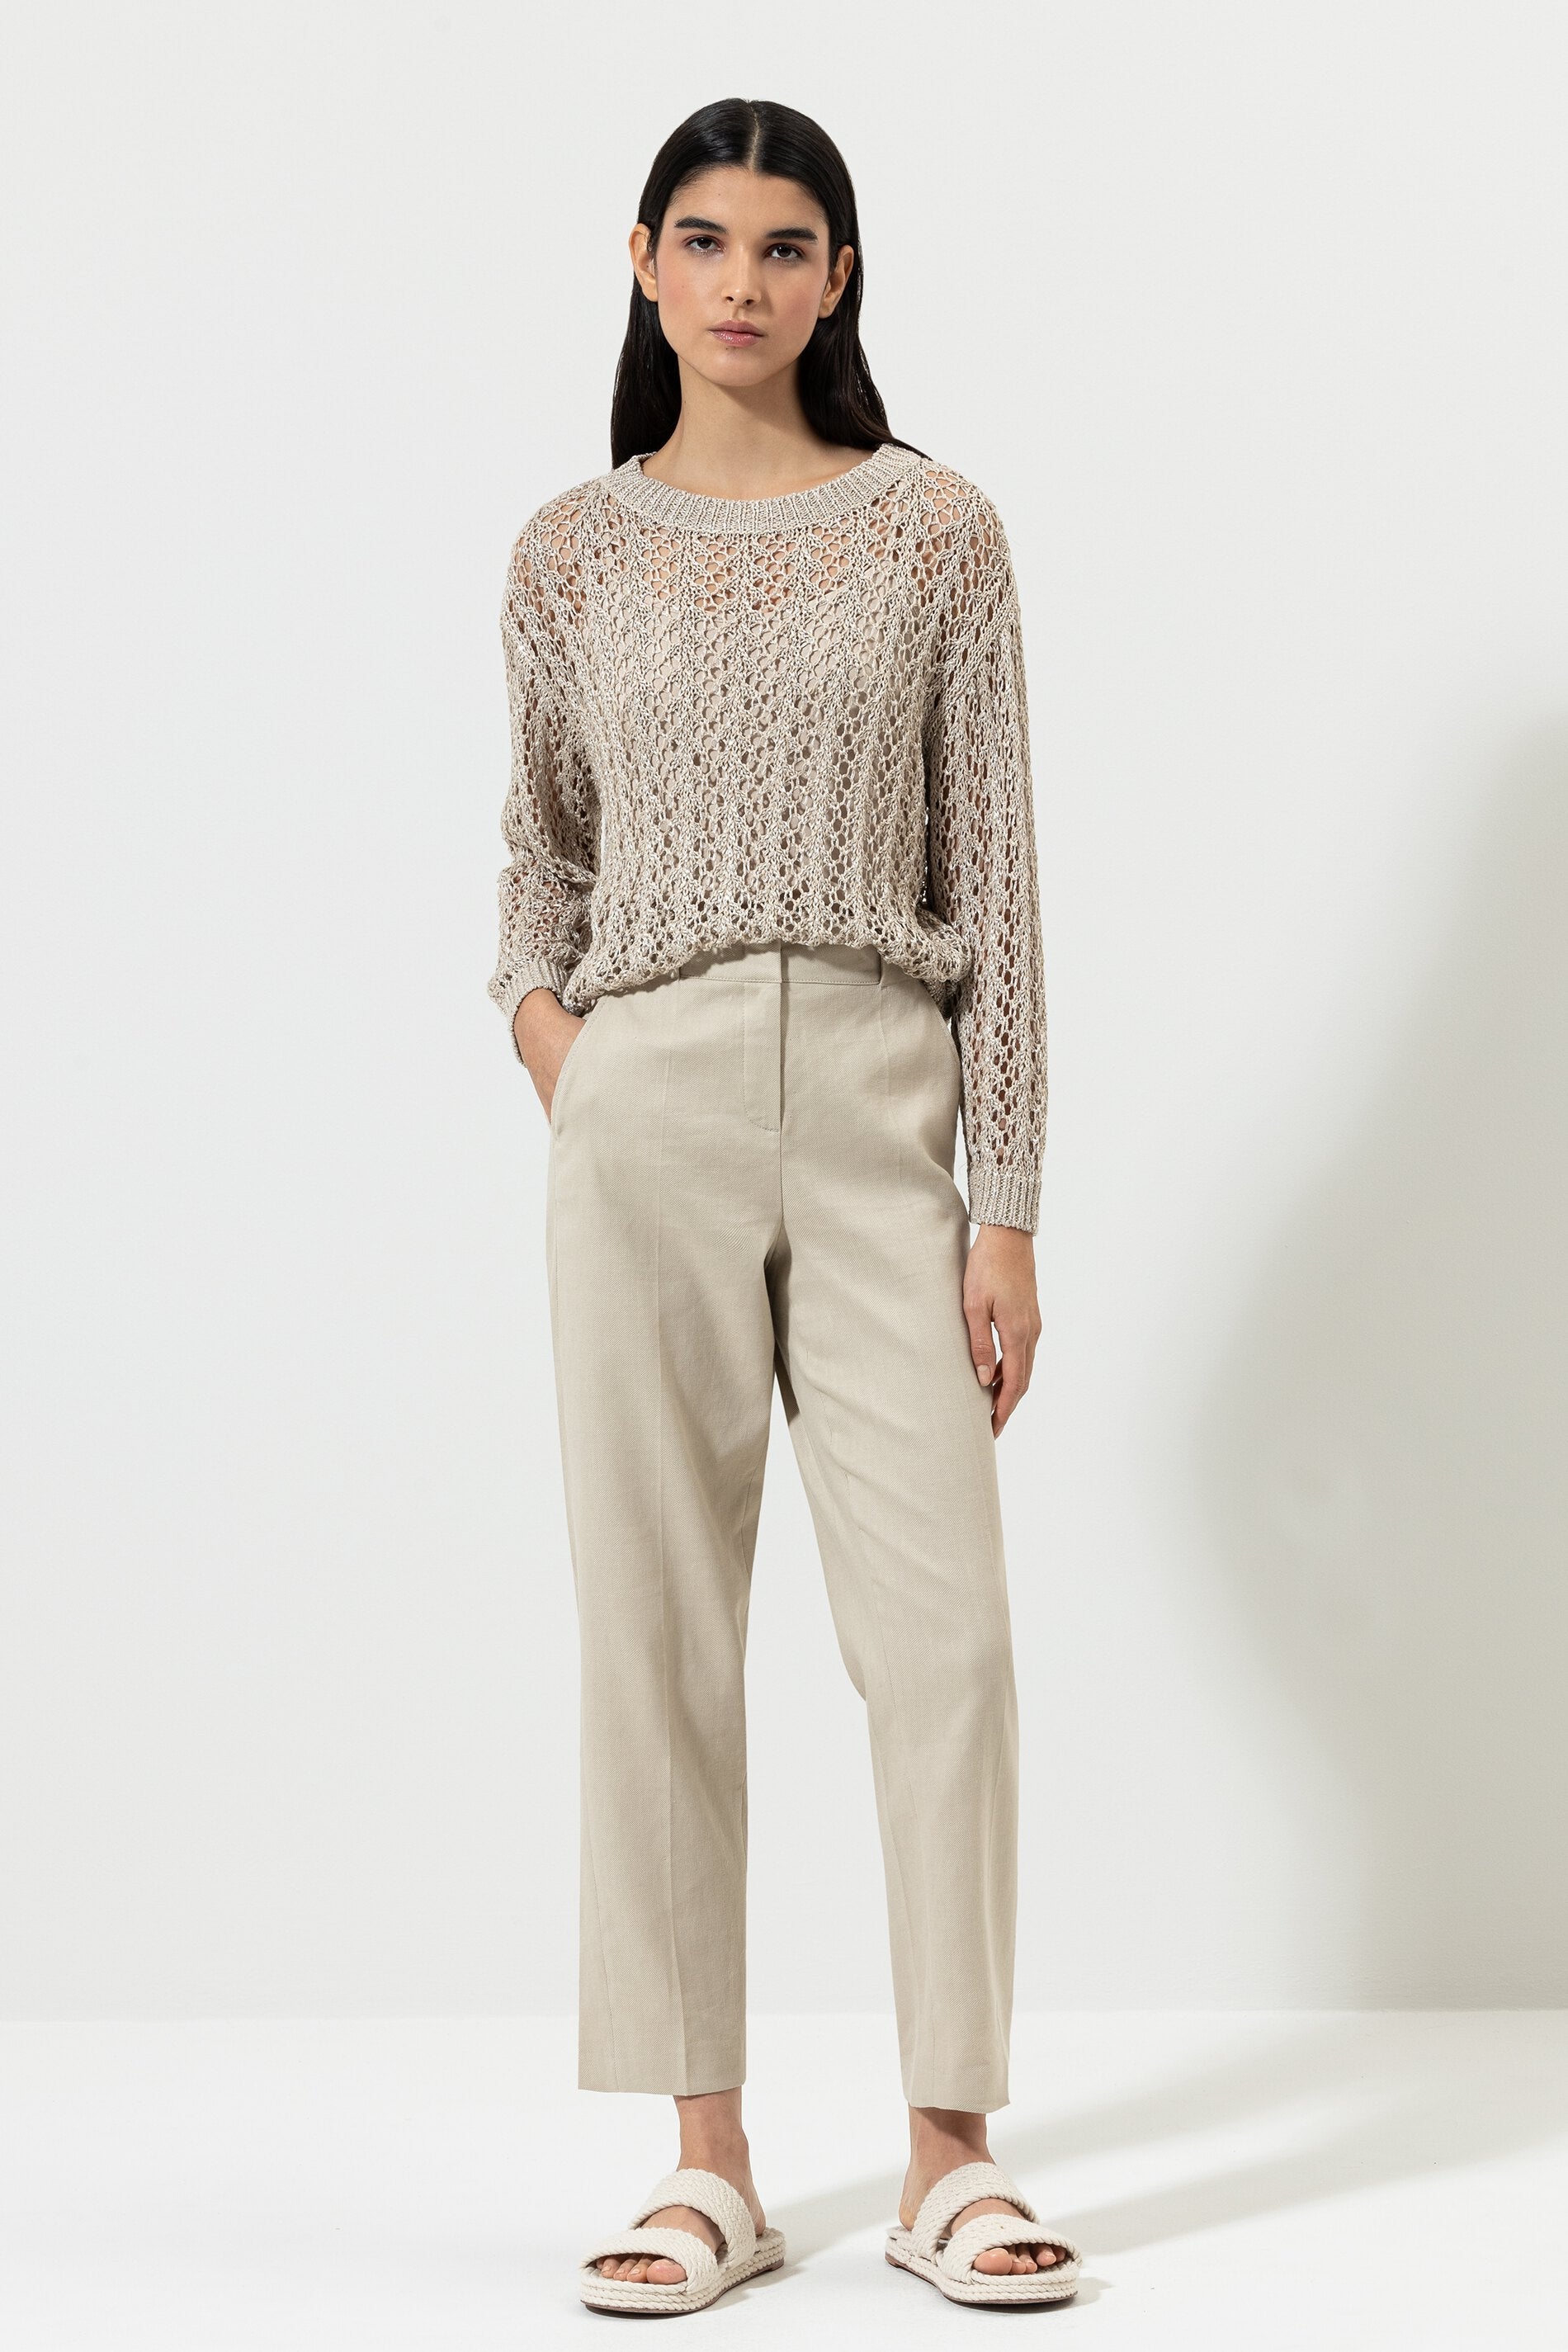 LUISA-CERANO-OUTLET-SALE-Pullover-in-Ajour-Muster-Strick-ARCHIVE-COLLECTION_5121b1f1-3ac2-45dd-8944-3ab86c1baeda.jpg